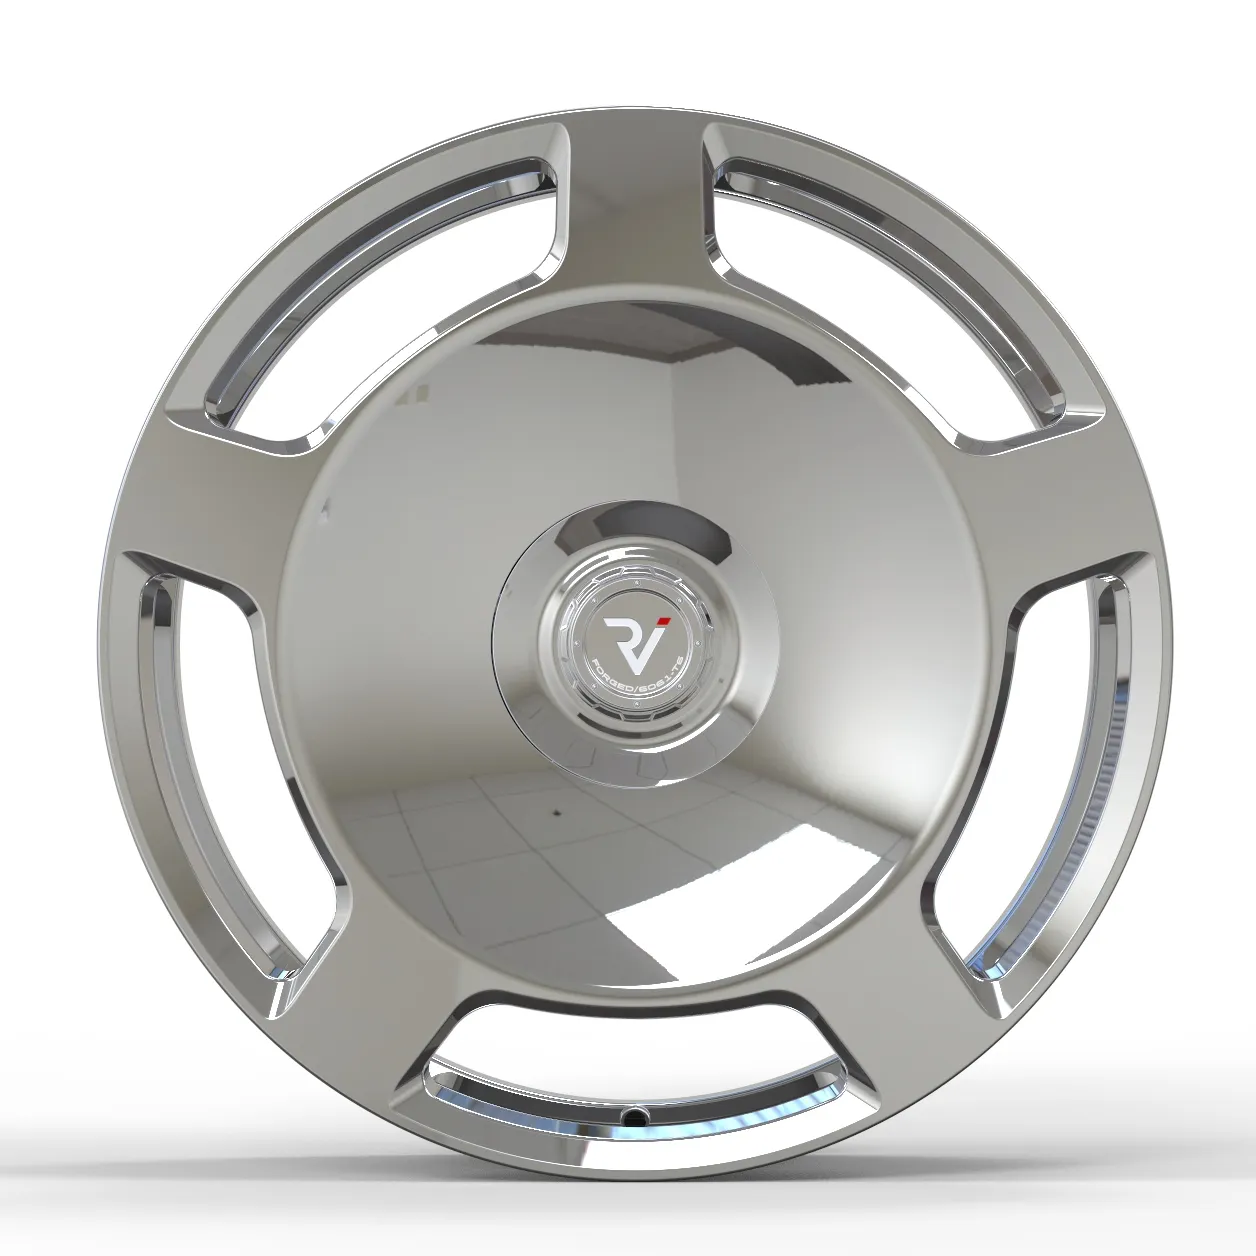 Maybach Aluminum Alloy forged rim 19 20 21 inch polished car wheels S480 S680 S500 S560 car wheels